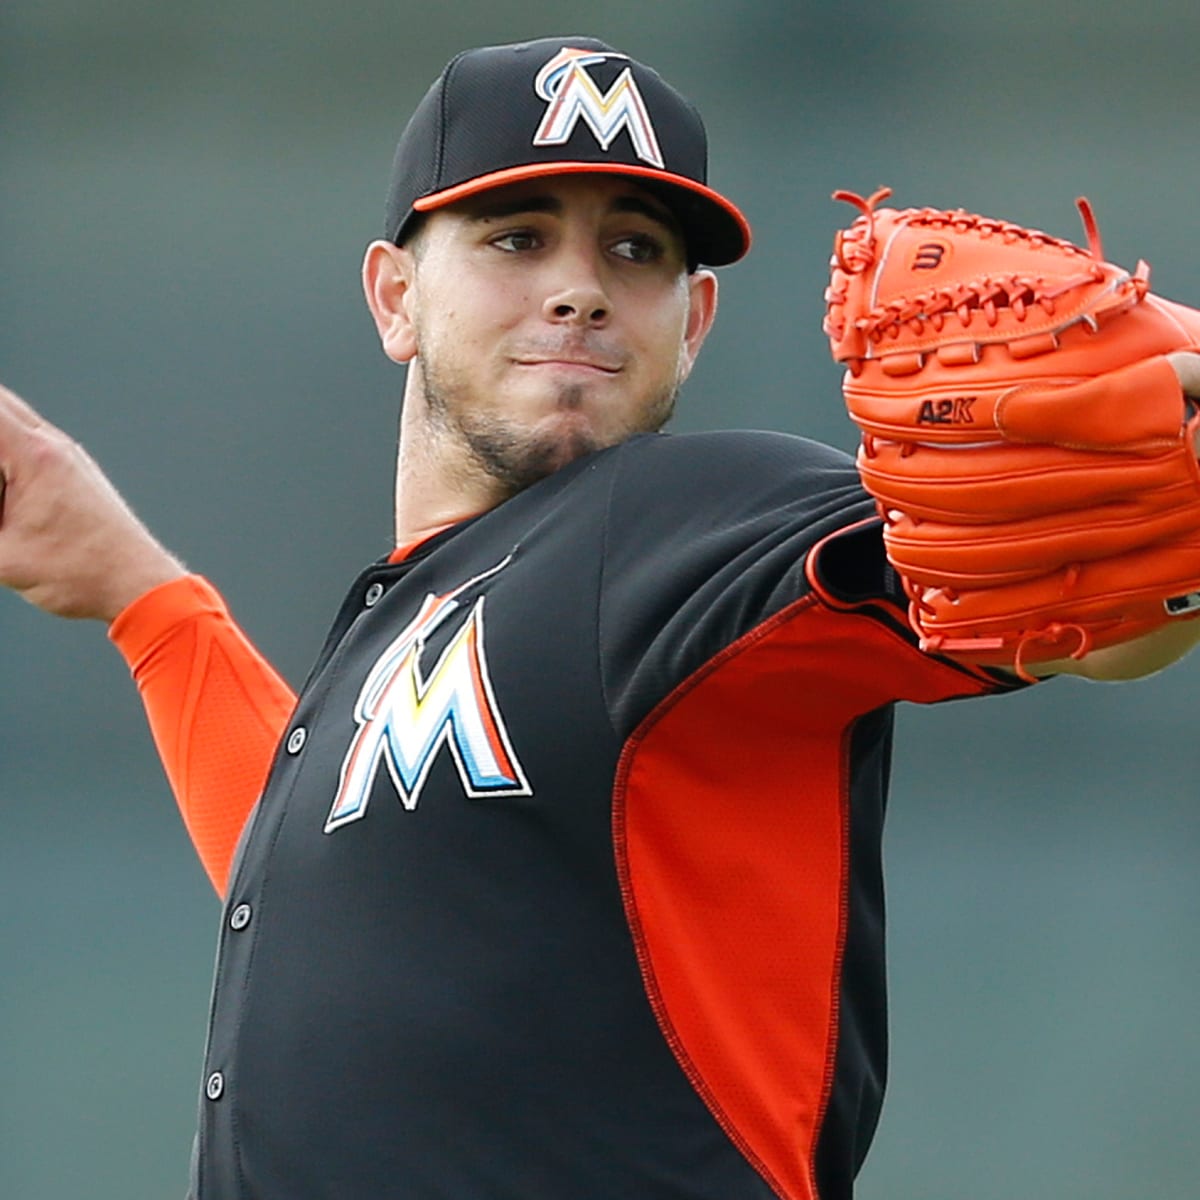 Jose Fernandez Cause of Death: How Did the Marlins Pitcher Die?